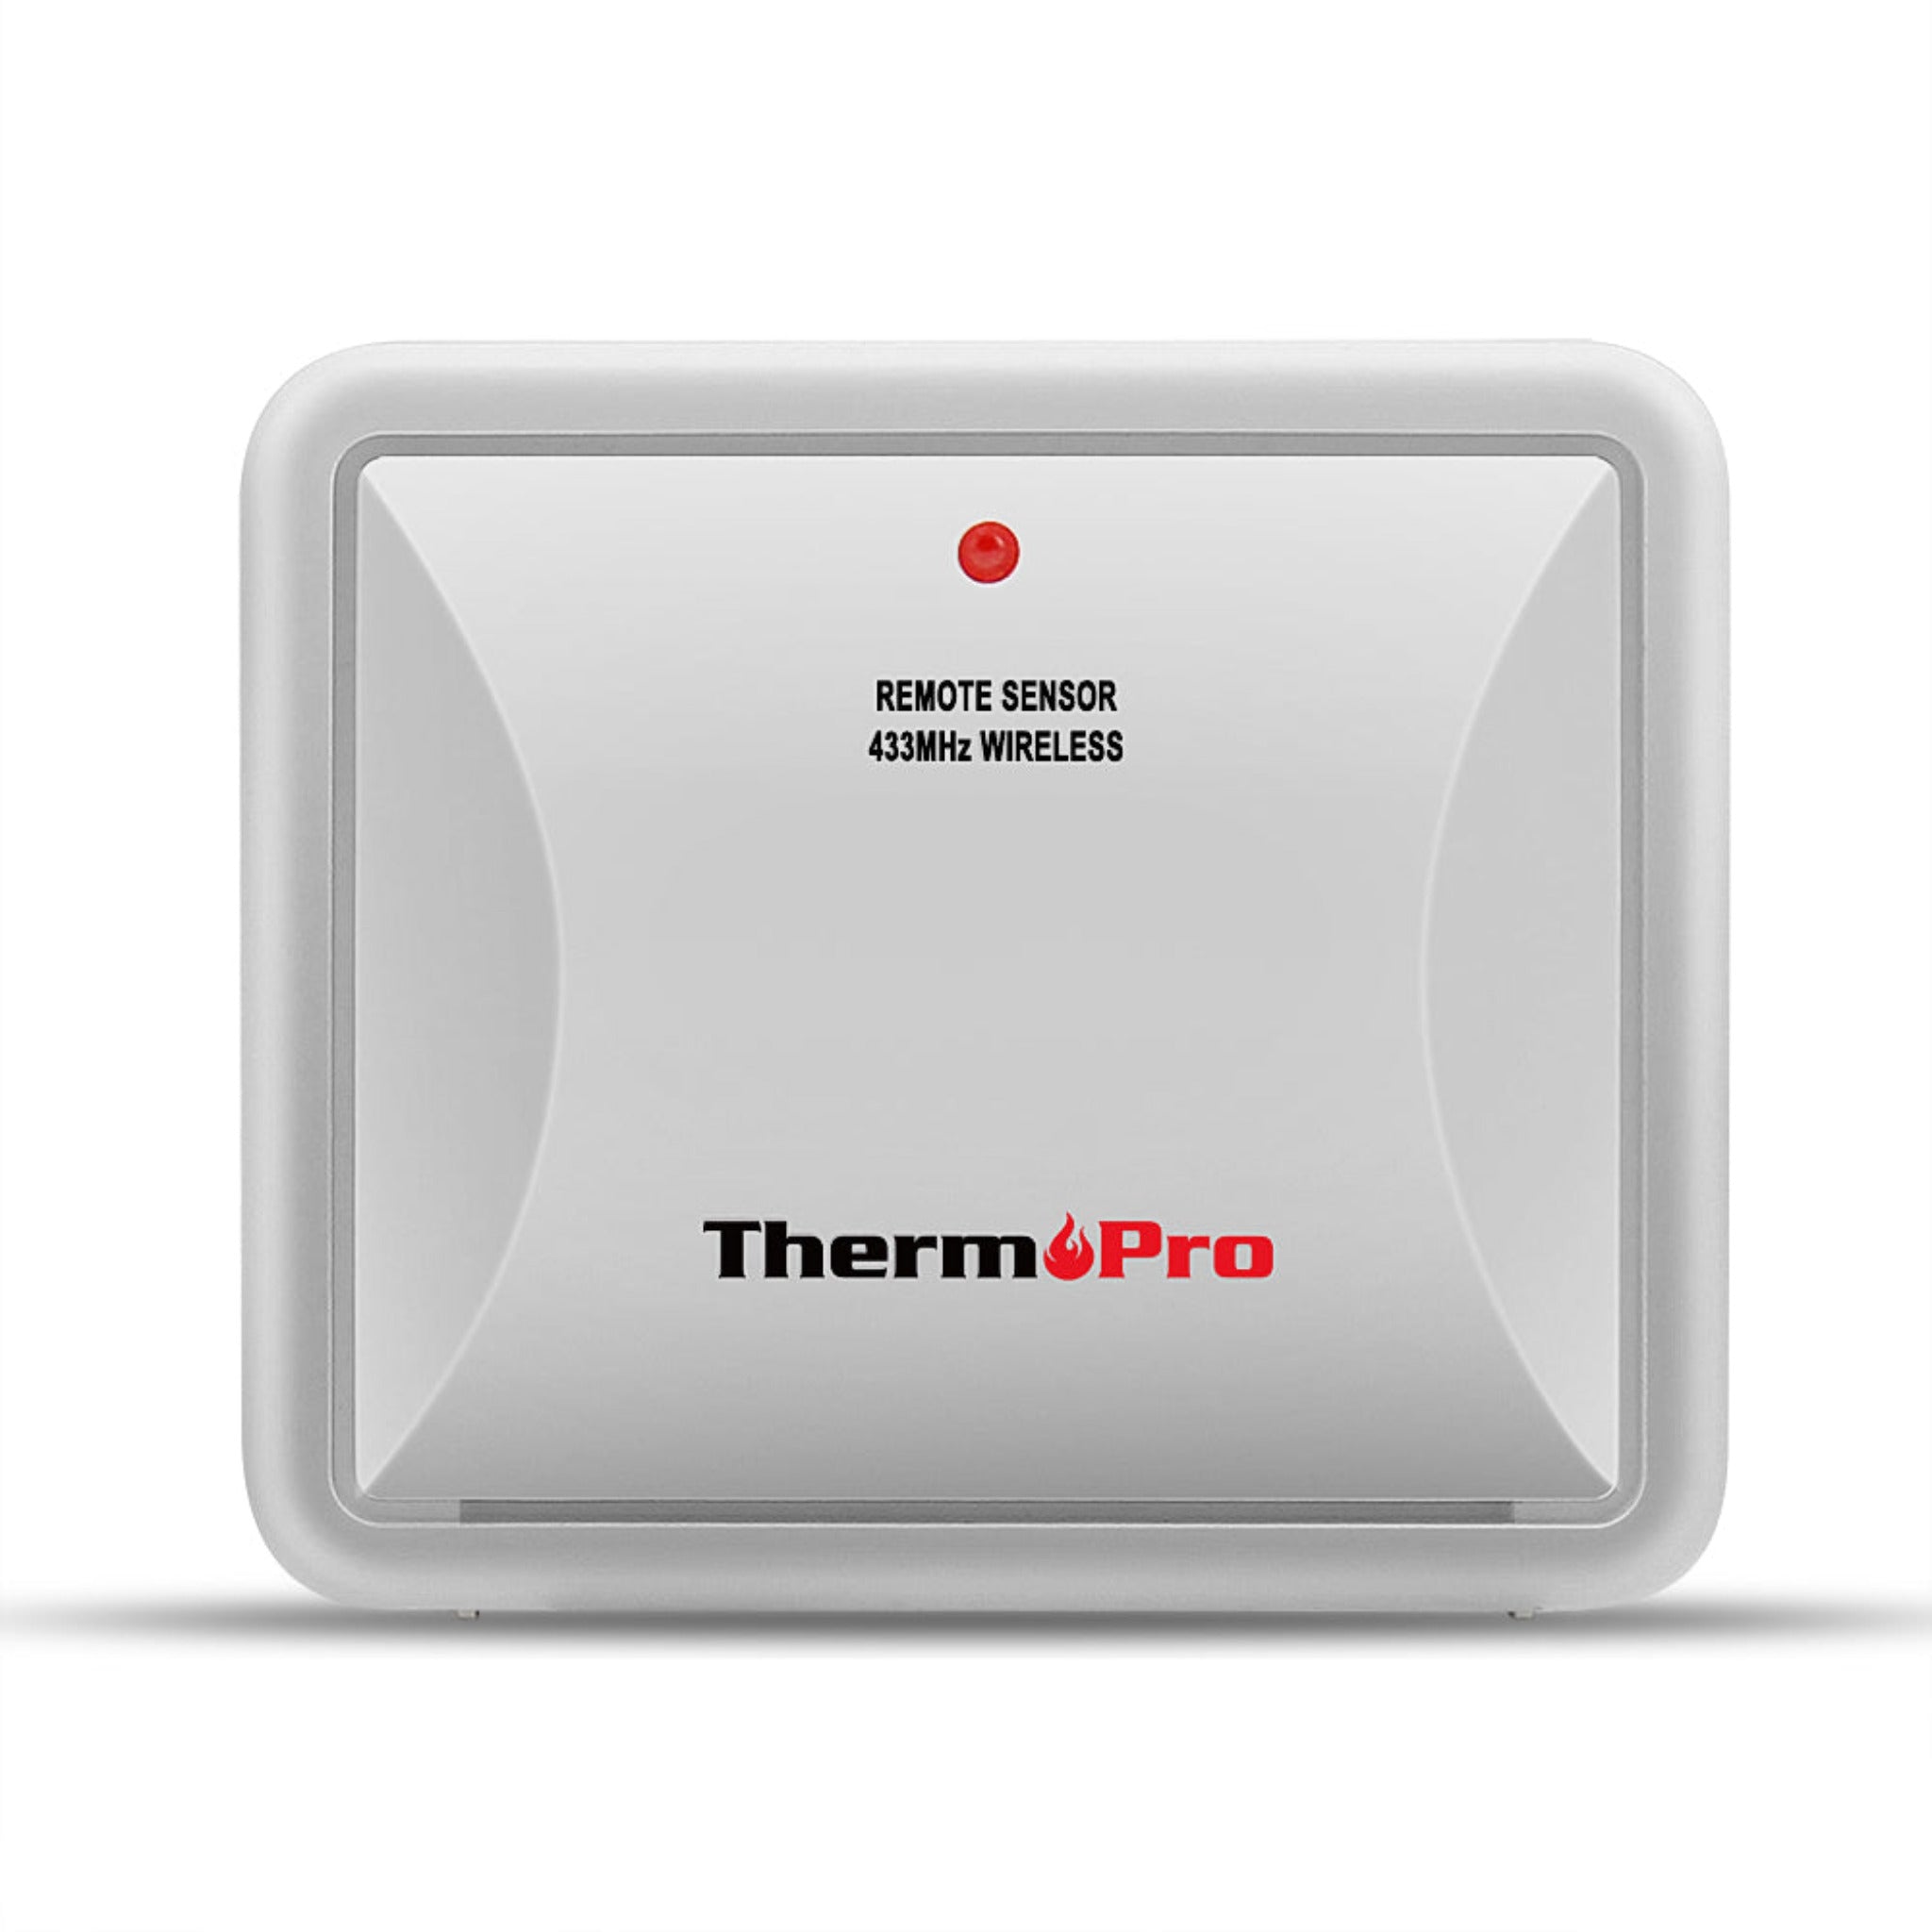 Hatching Time Therm Pro. Remote wireless sensor shown. 433MHz wireless signal. 